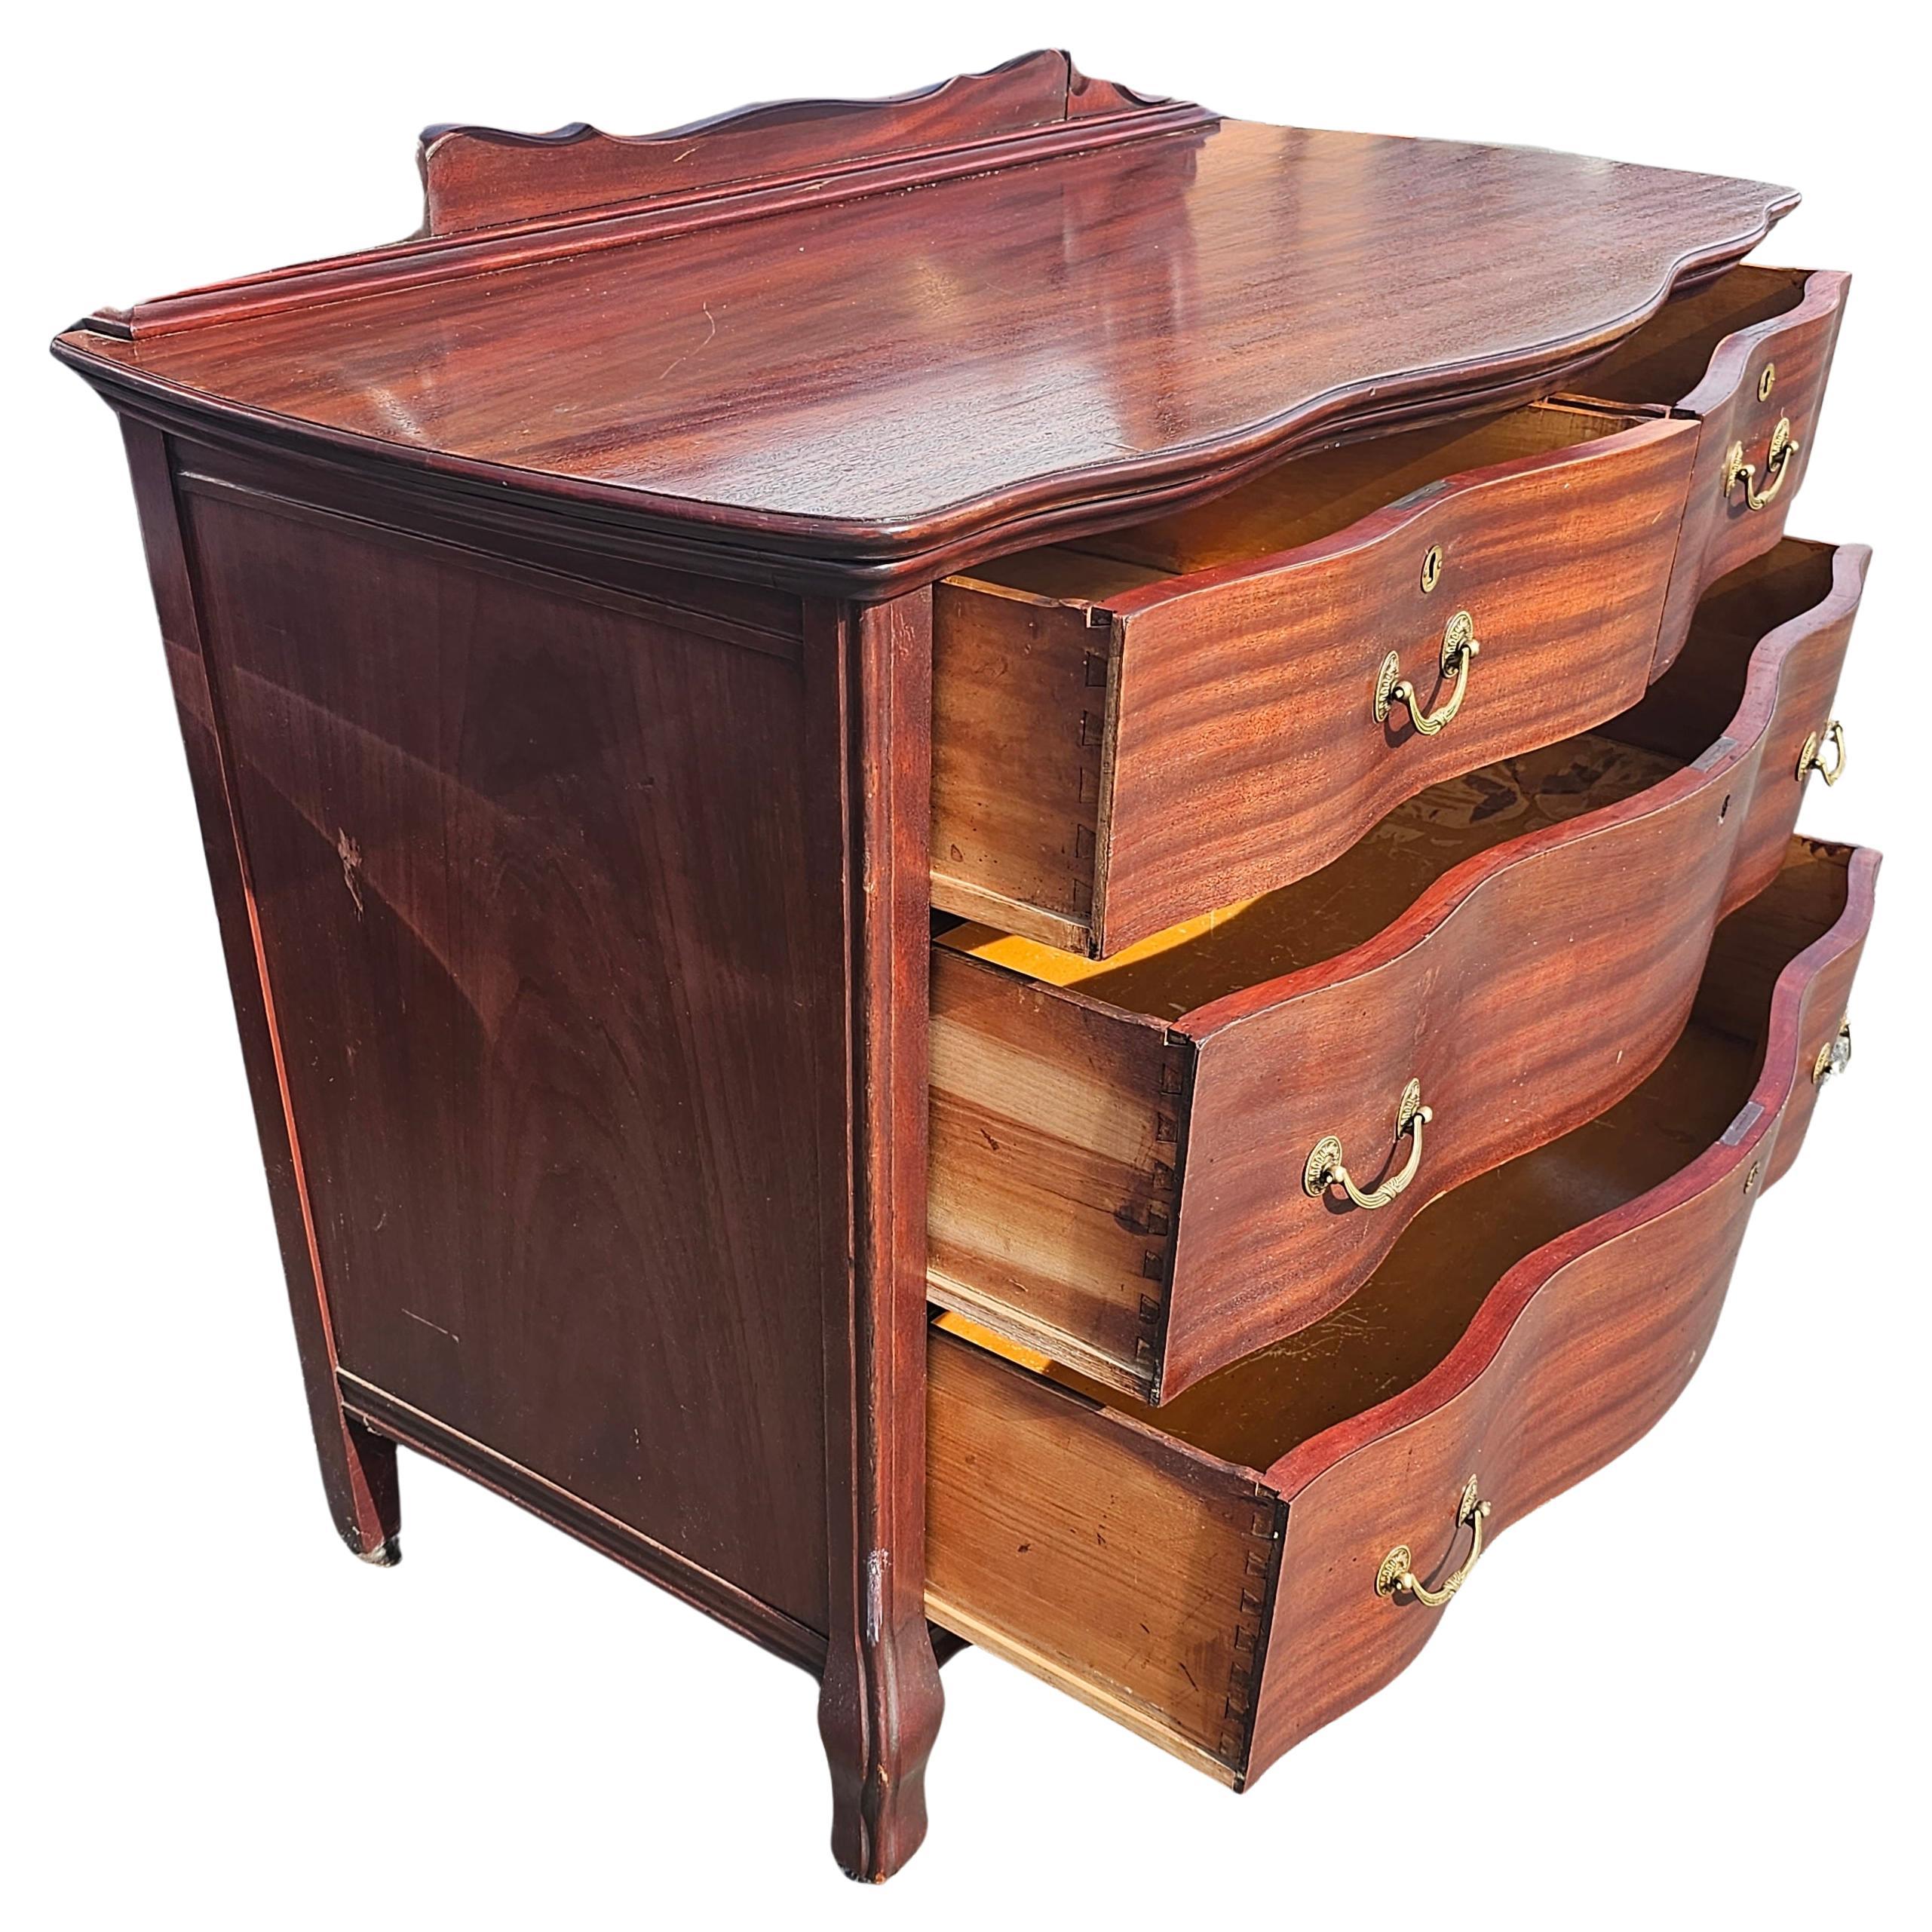 Early 20th Century Widdicomb Mahogany Serpentine Chest with Mirror on Wheels In Good Condition For Sale In Germantown, MD